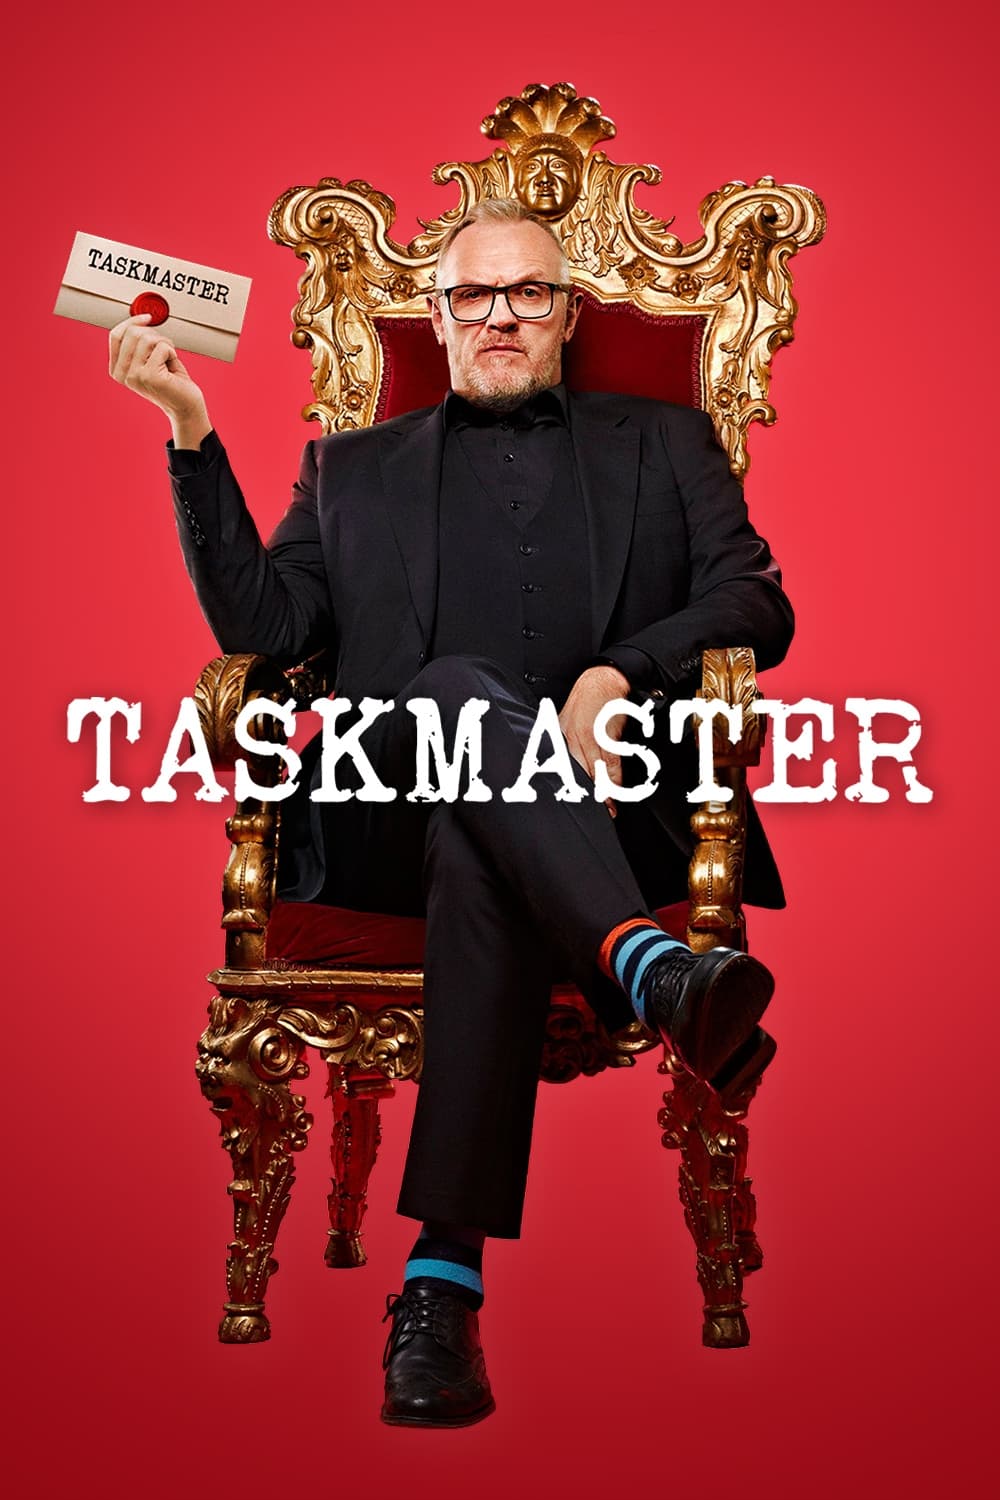 Taskmaster TV Shows About Master